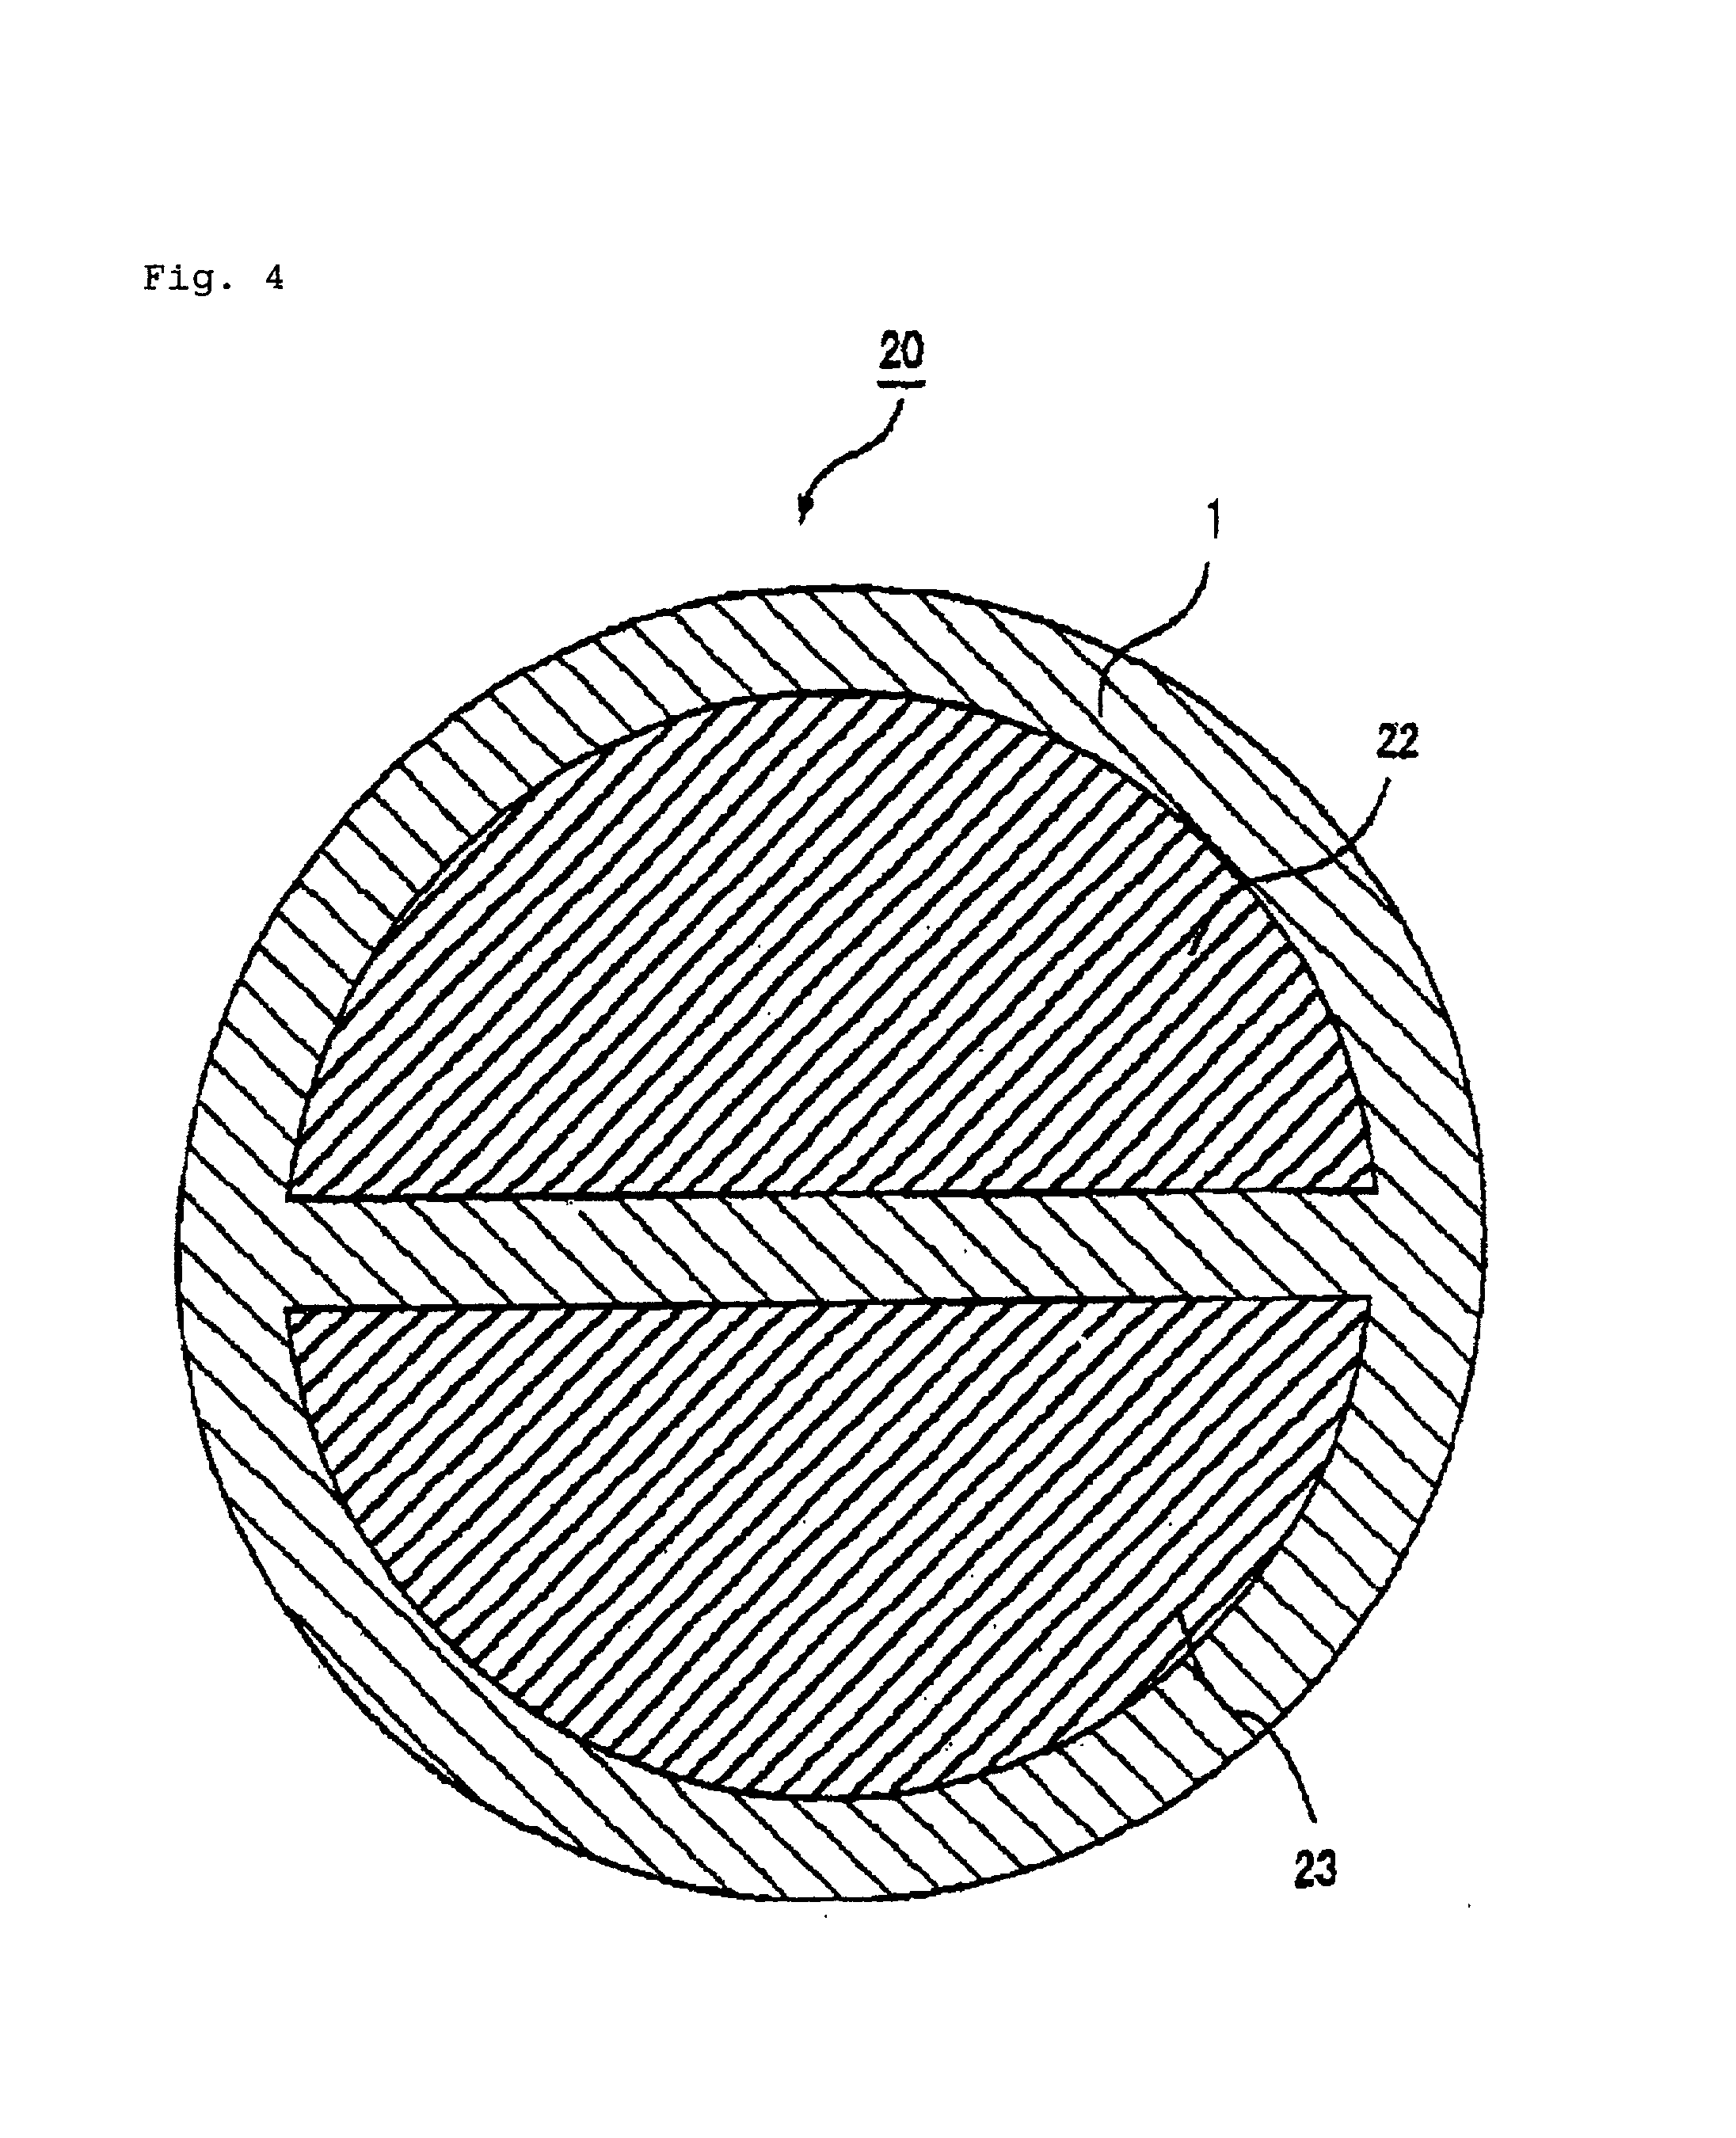 Ceramic board for apparatuses for semiconductor manufacture and inspection